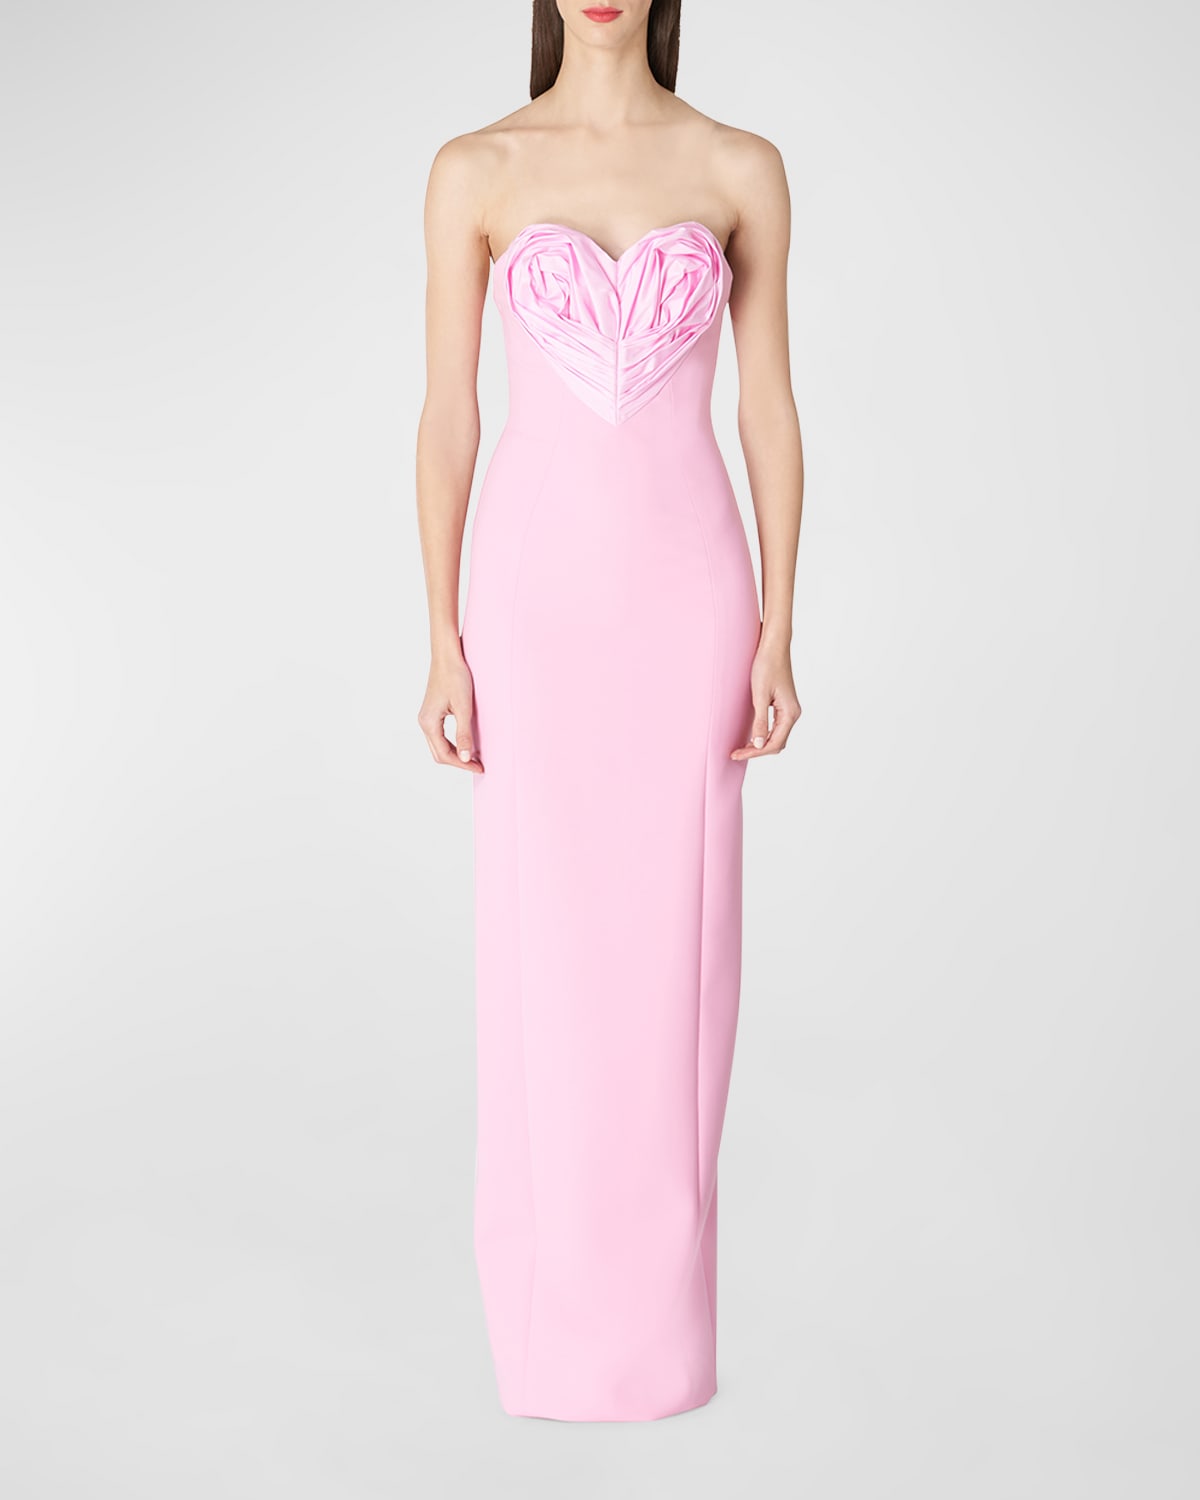 Carolina Herrera Column Gown with Attached Belted Overskirt | Neiman Marcus